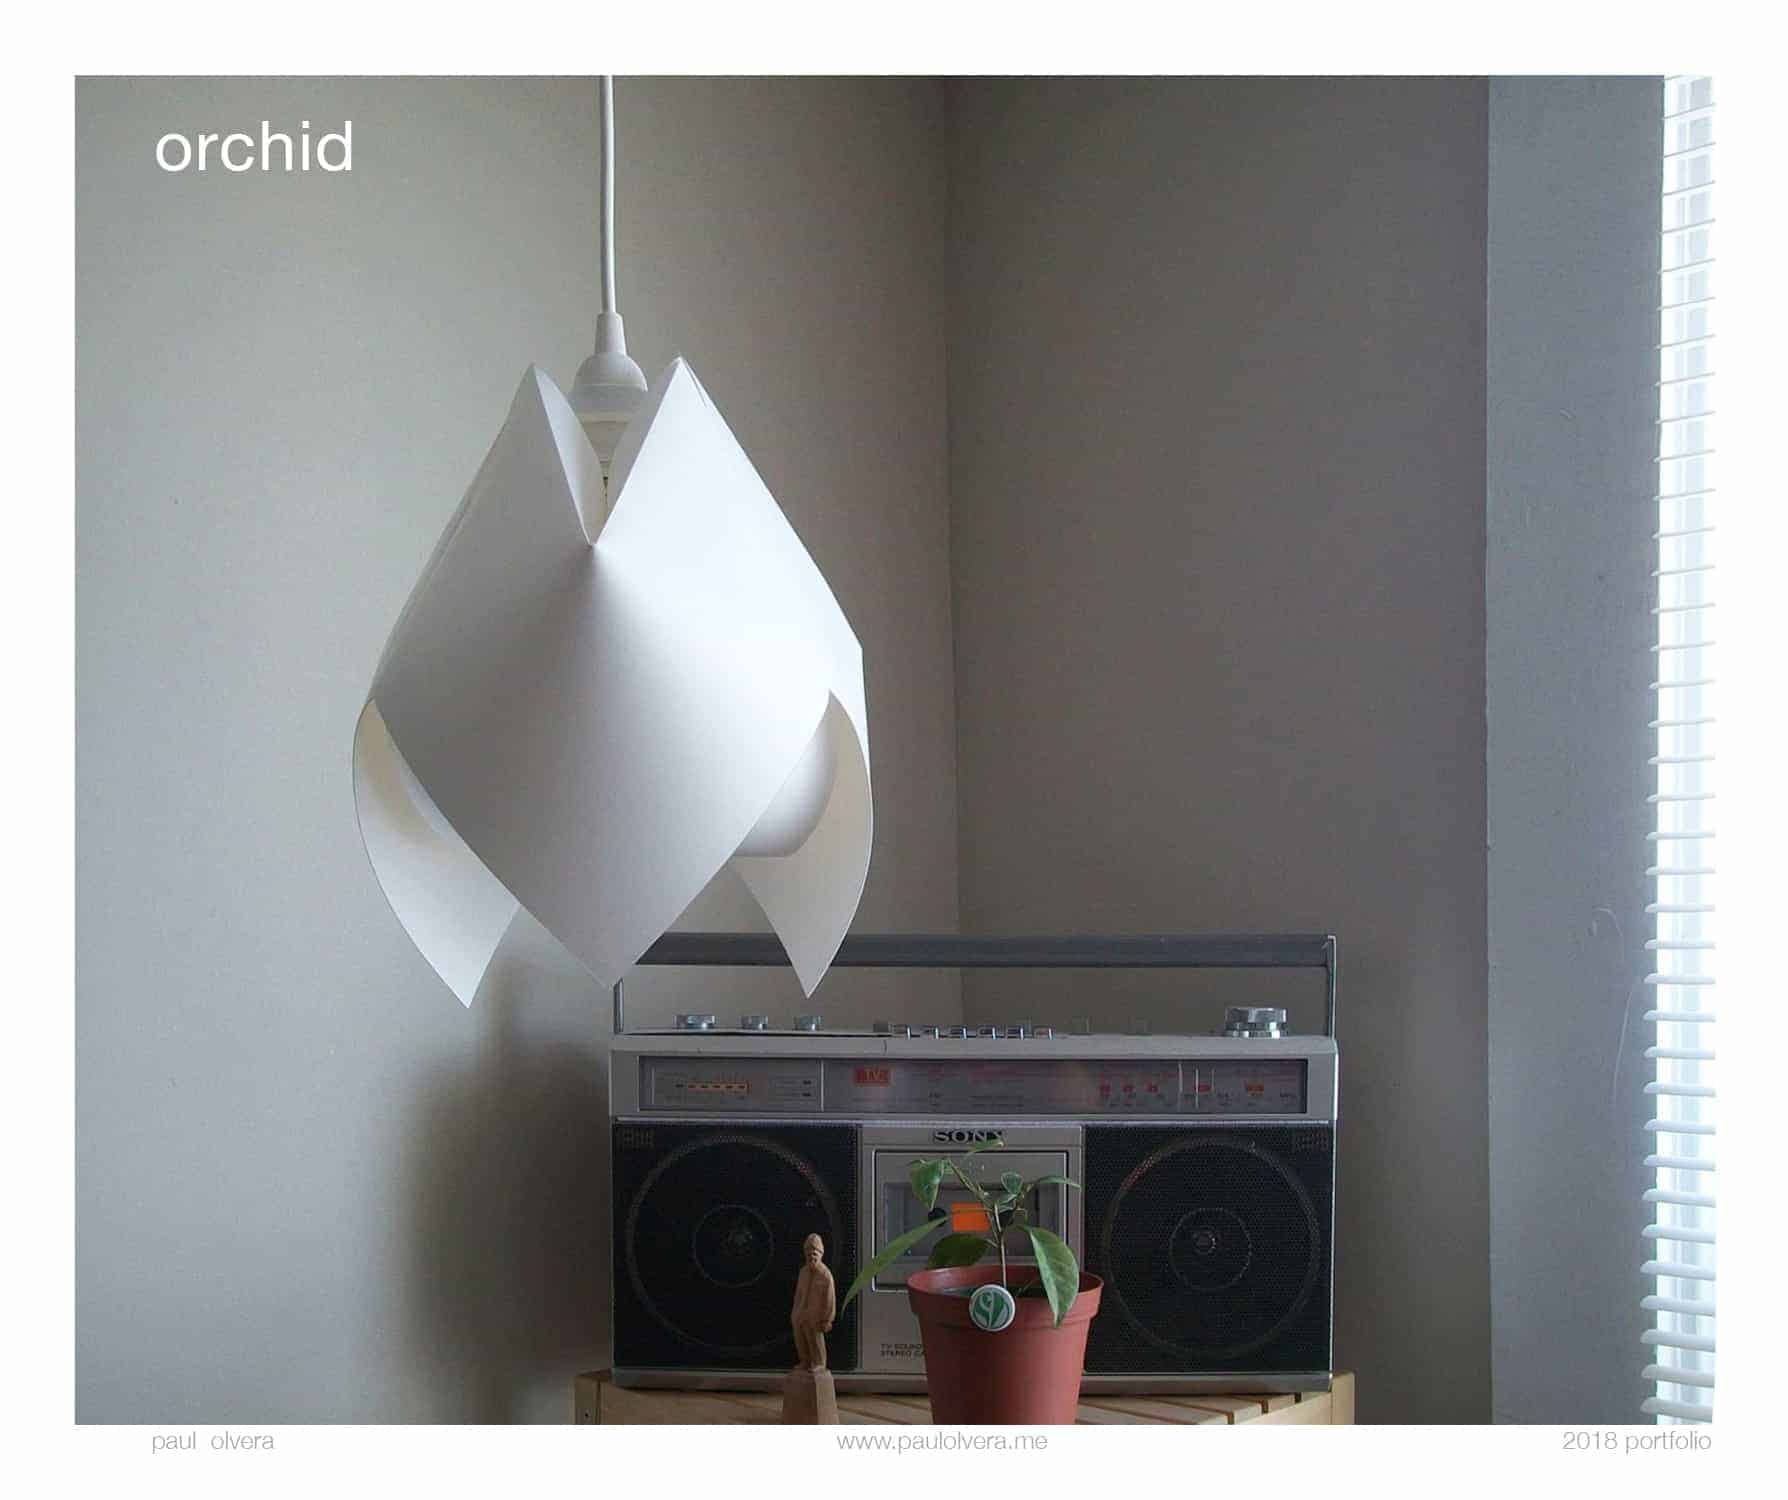 Orchid Lamp by Paul Olvera